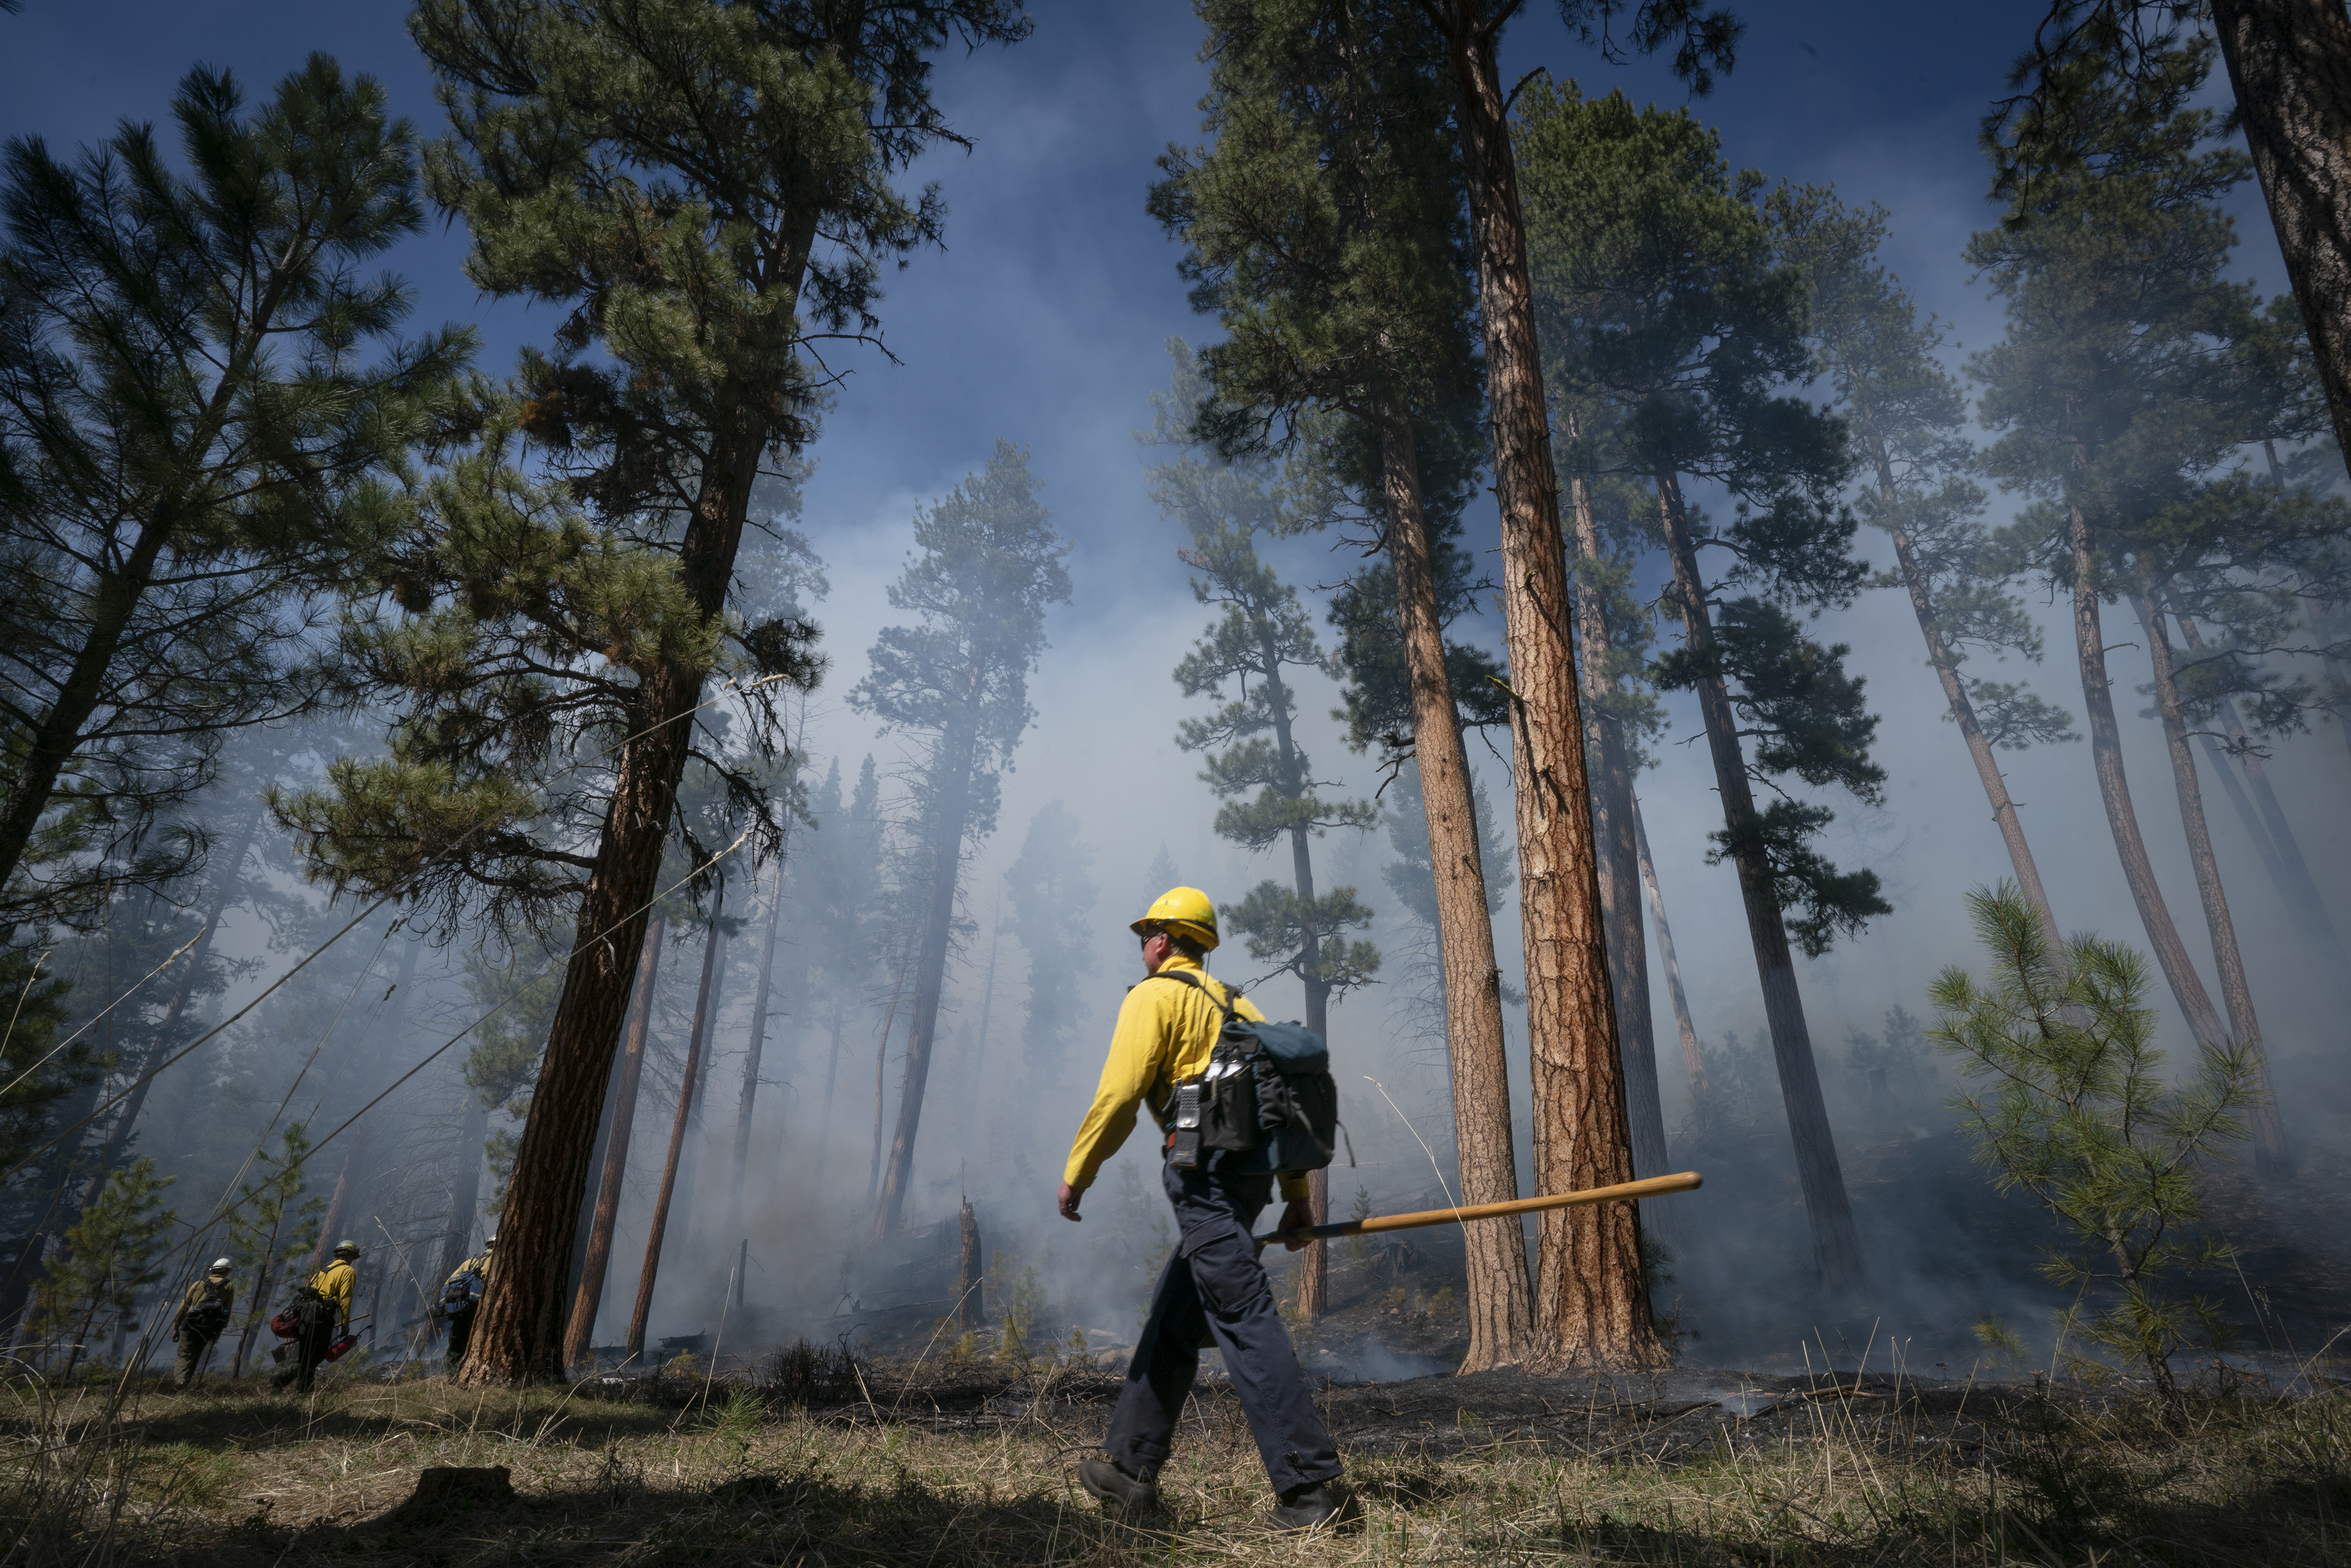 A person wearing protective fire clothing walks through a sparse forest of tall trees during a controlled burn.